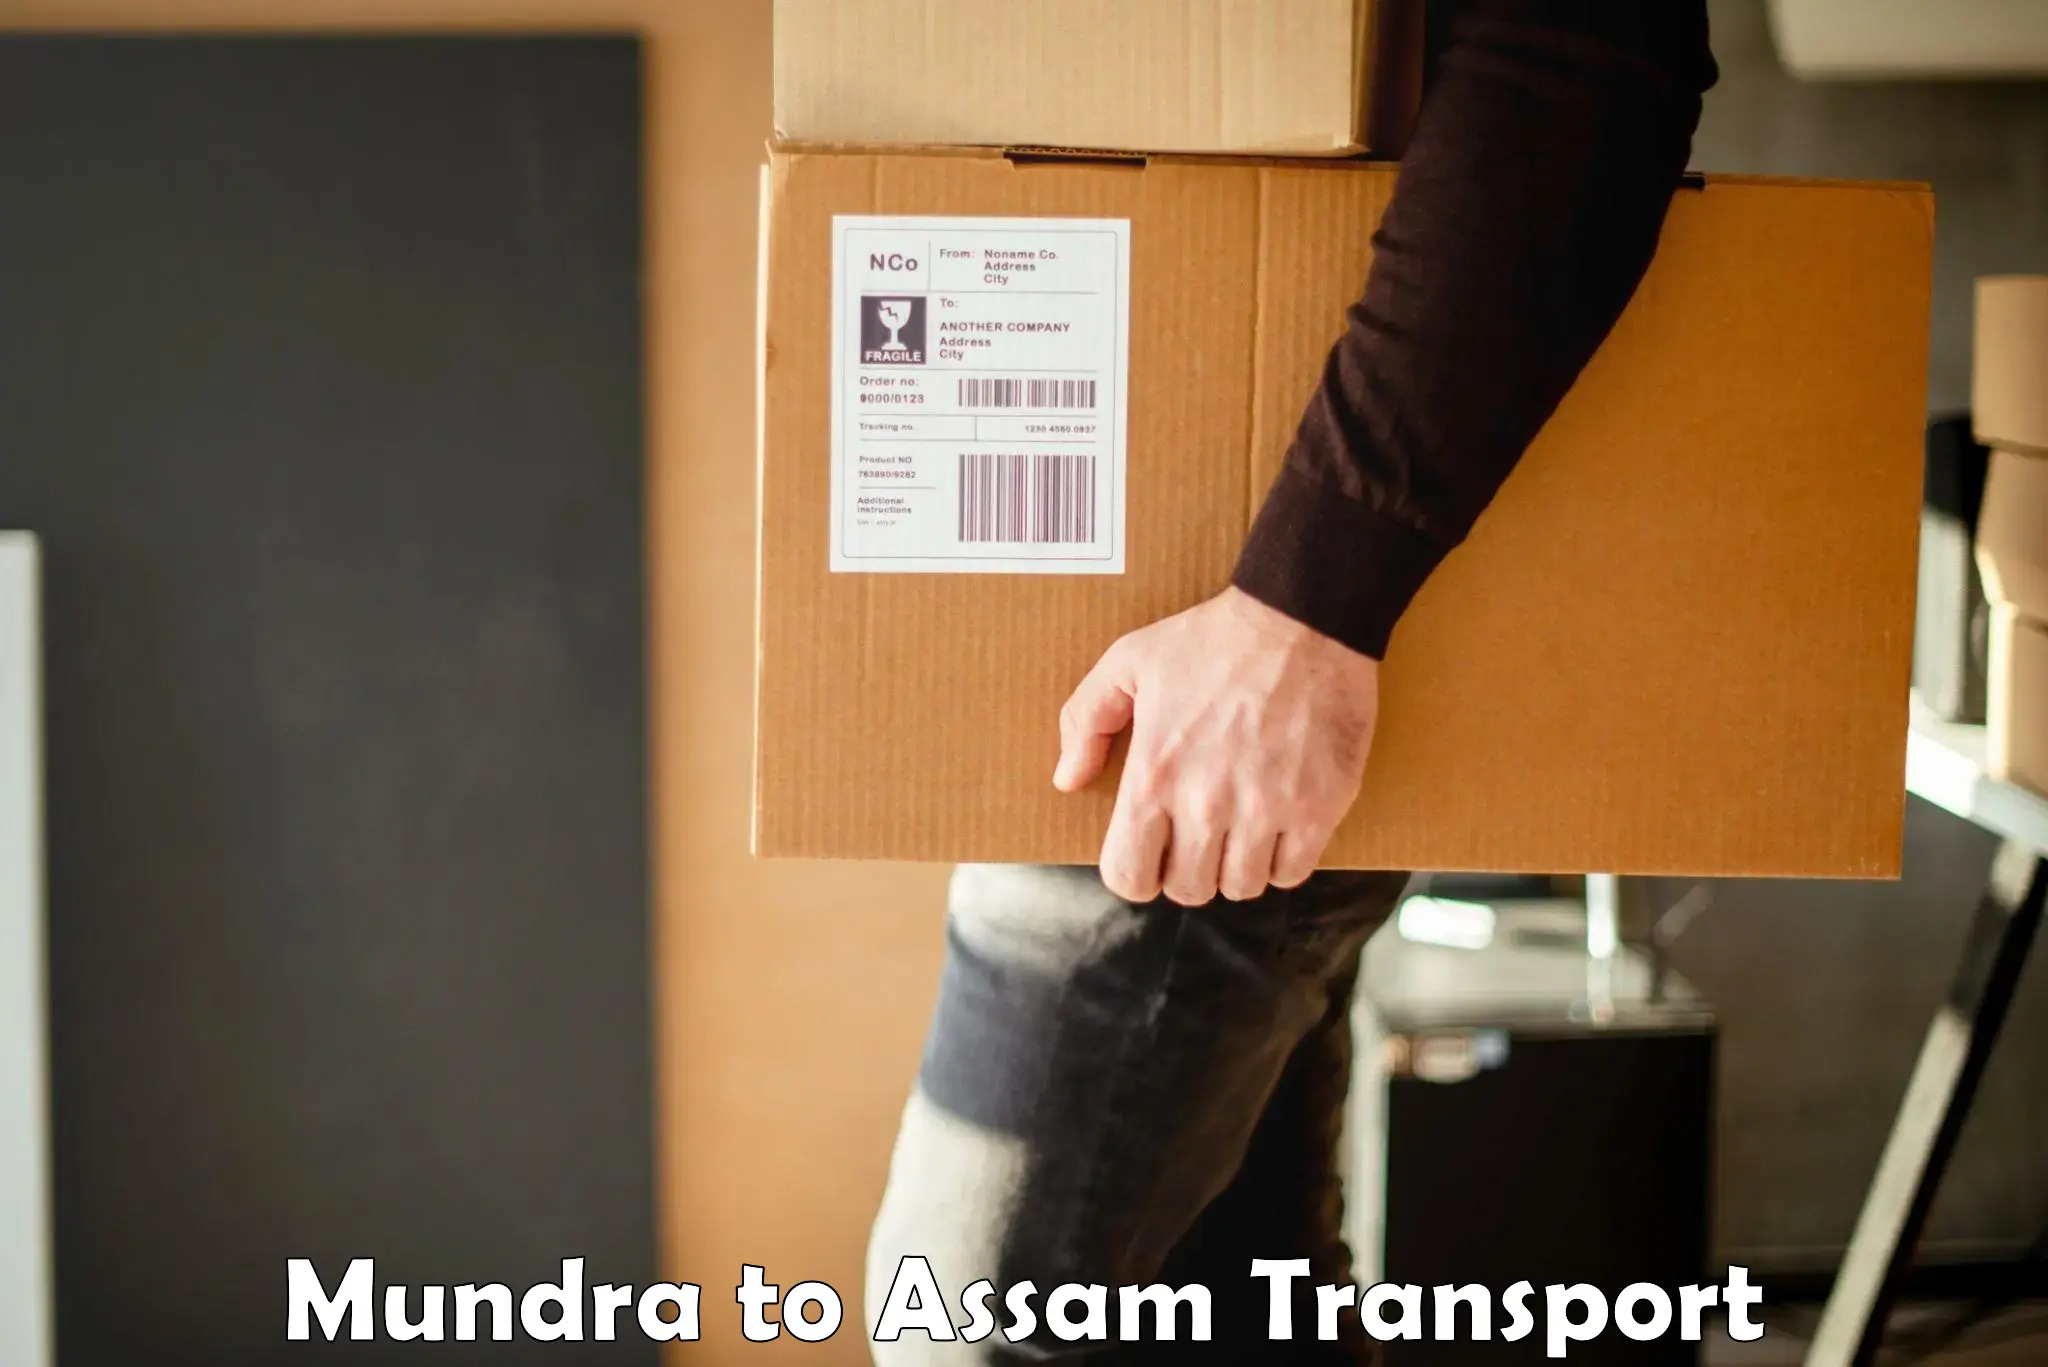 Container transport service Mundra to Digboi